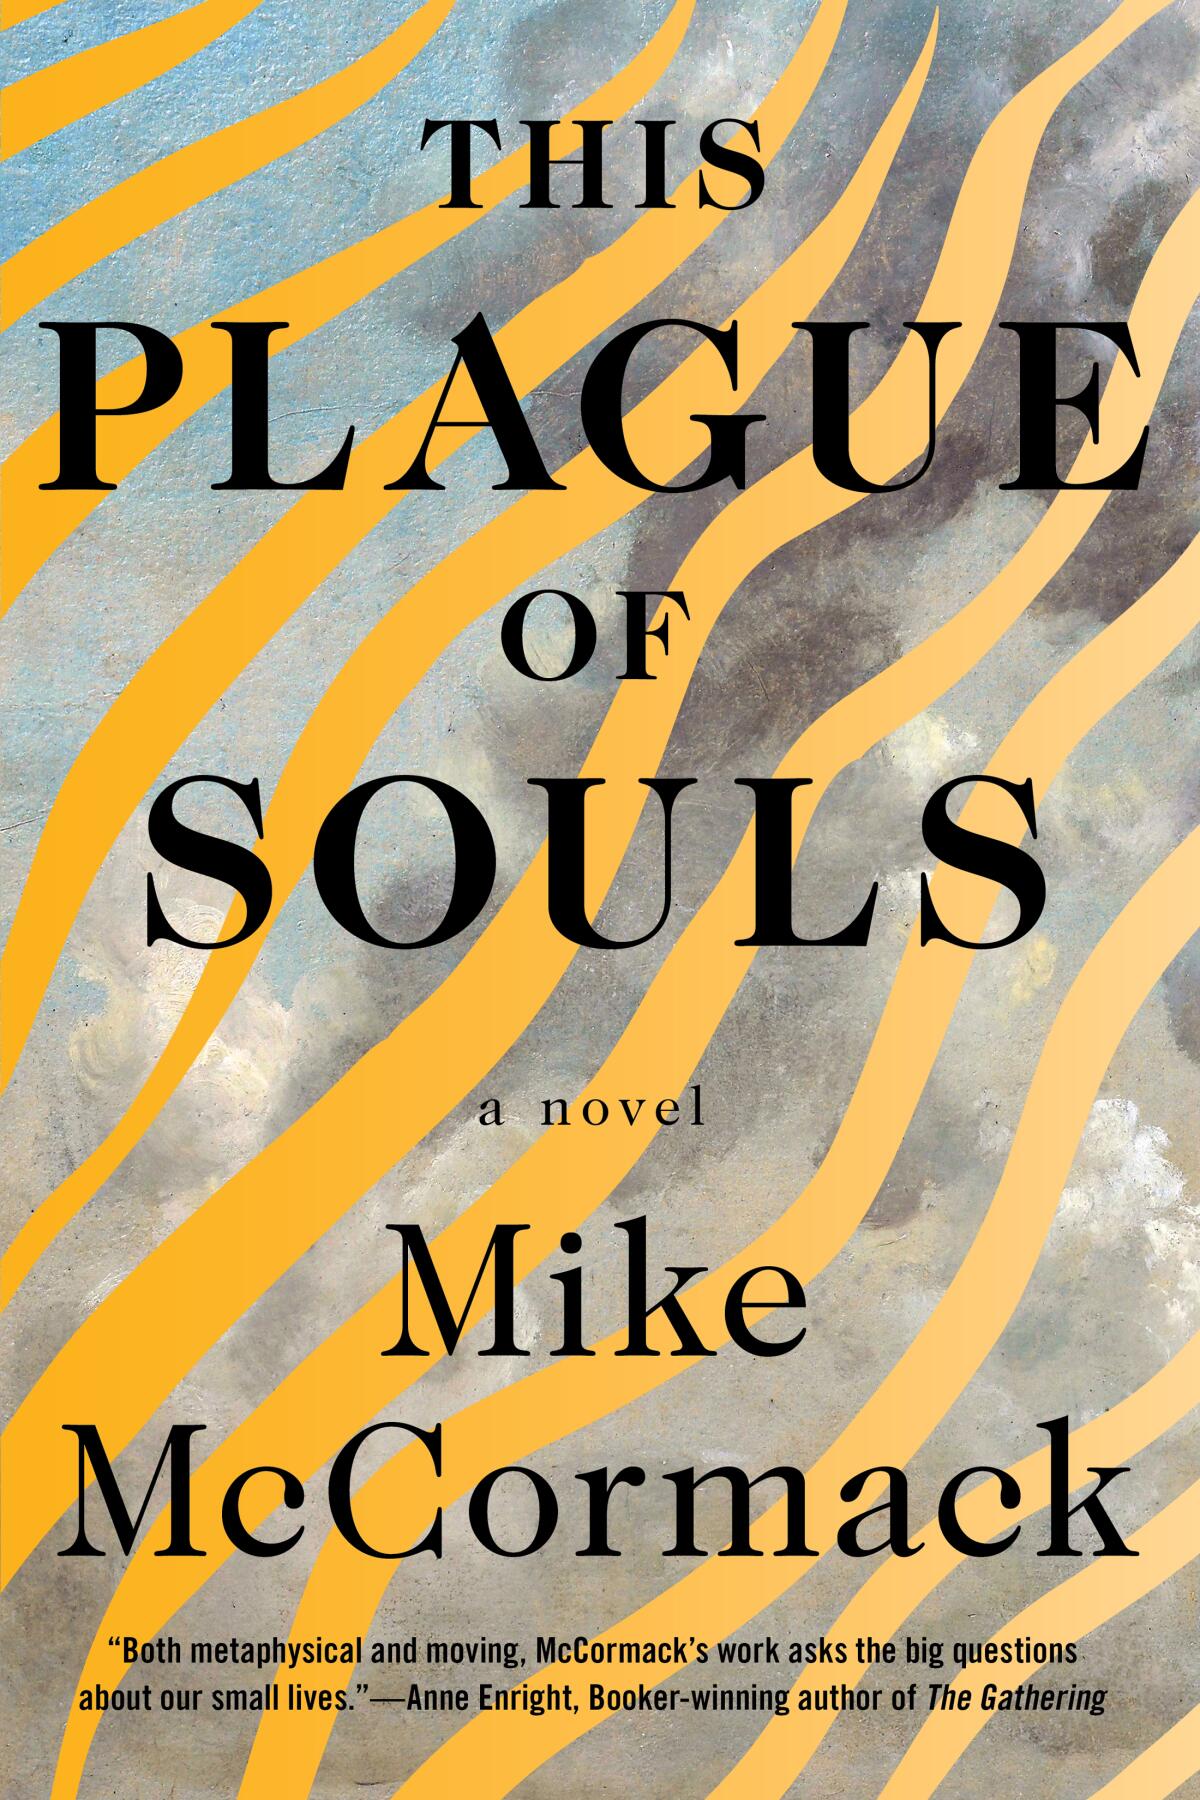 "This Plague of Souls" by Mike McCormack